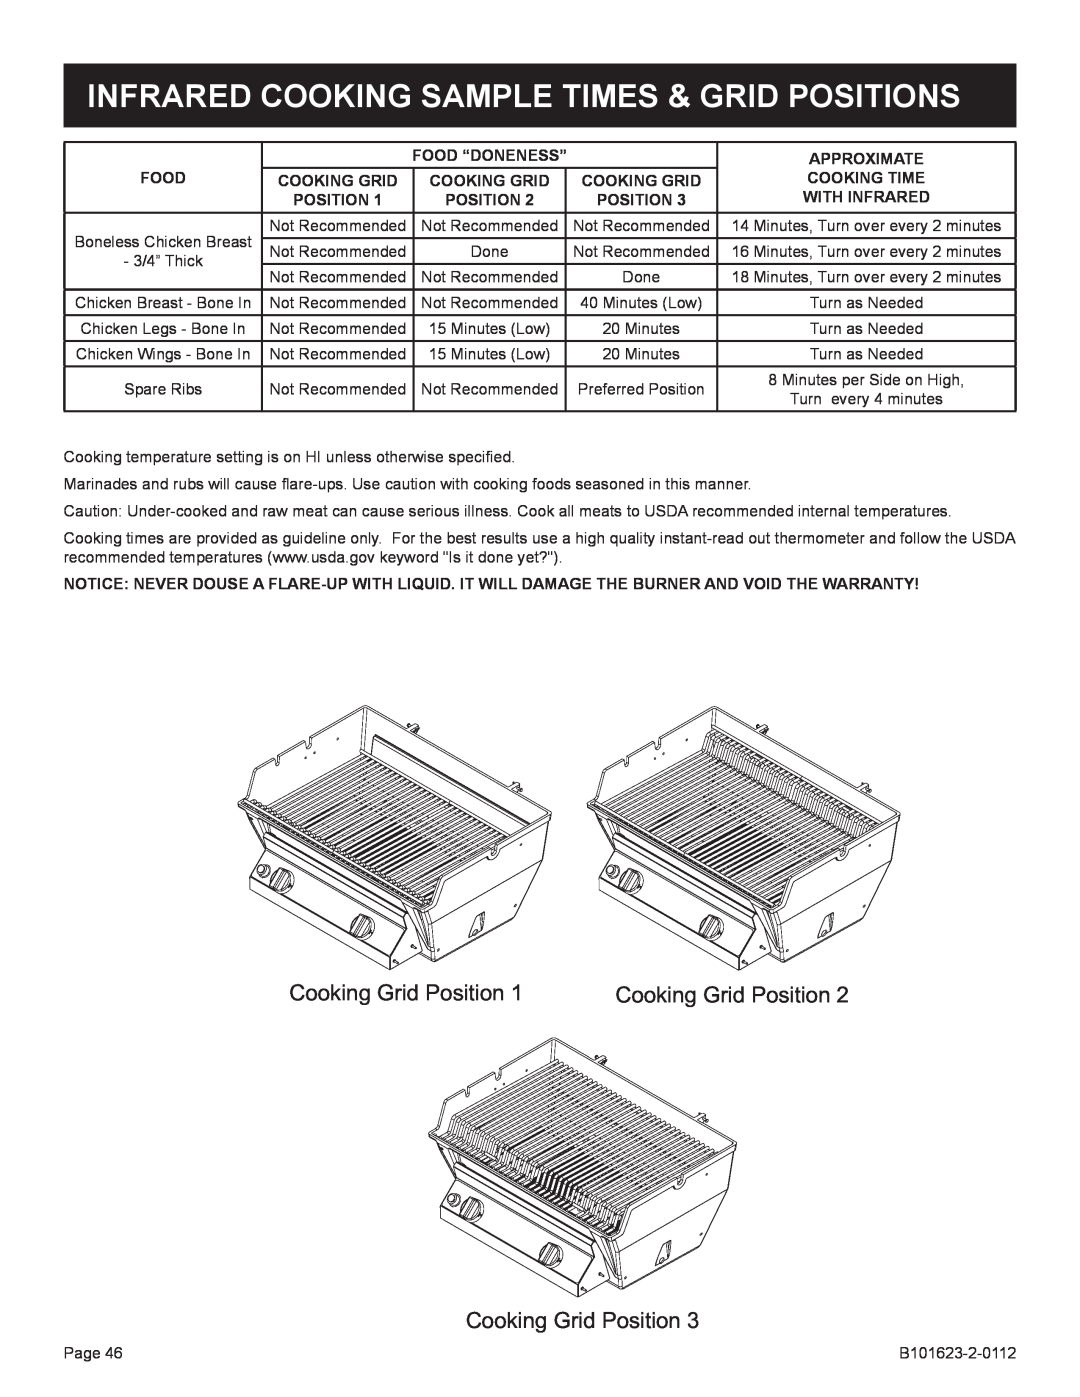 Broilmaster H3X-1, H4XN-1, H3XPK-1, H4PK-1, H3XN-1 manual Infrared Cooking Sample Times & Grid Positions, Cooking Grid Position 